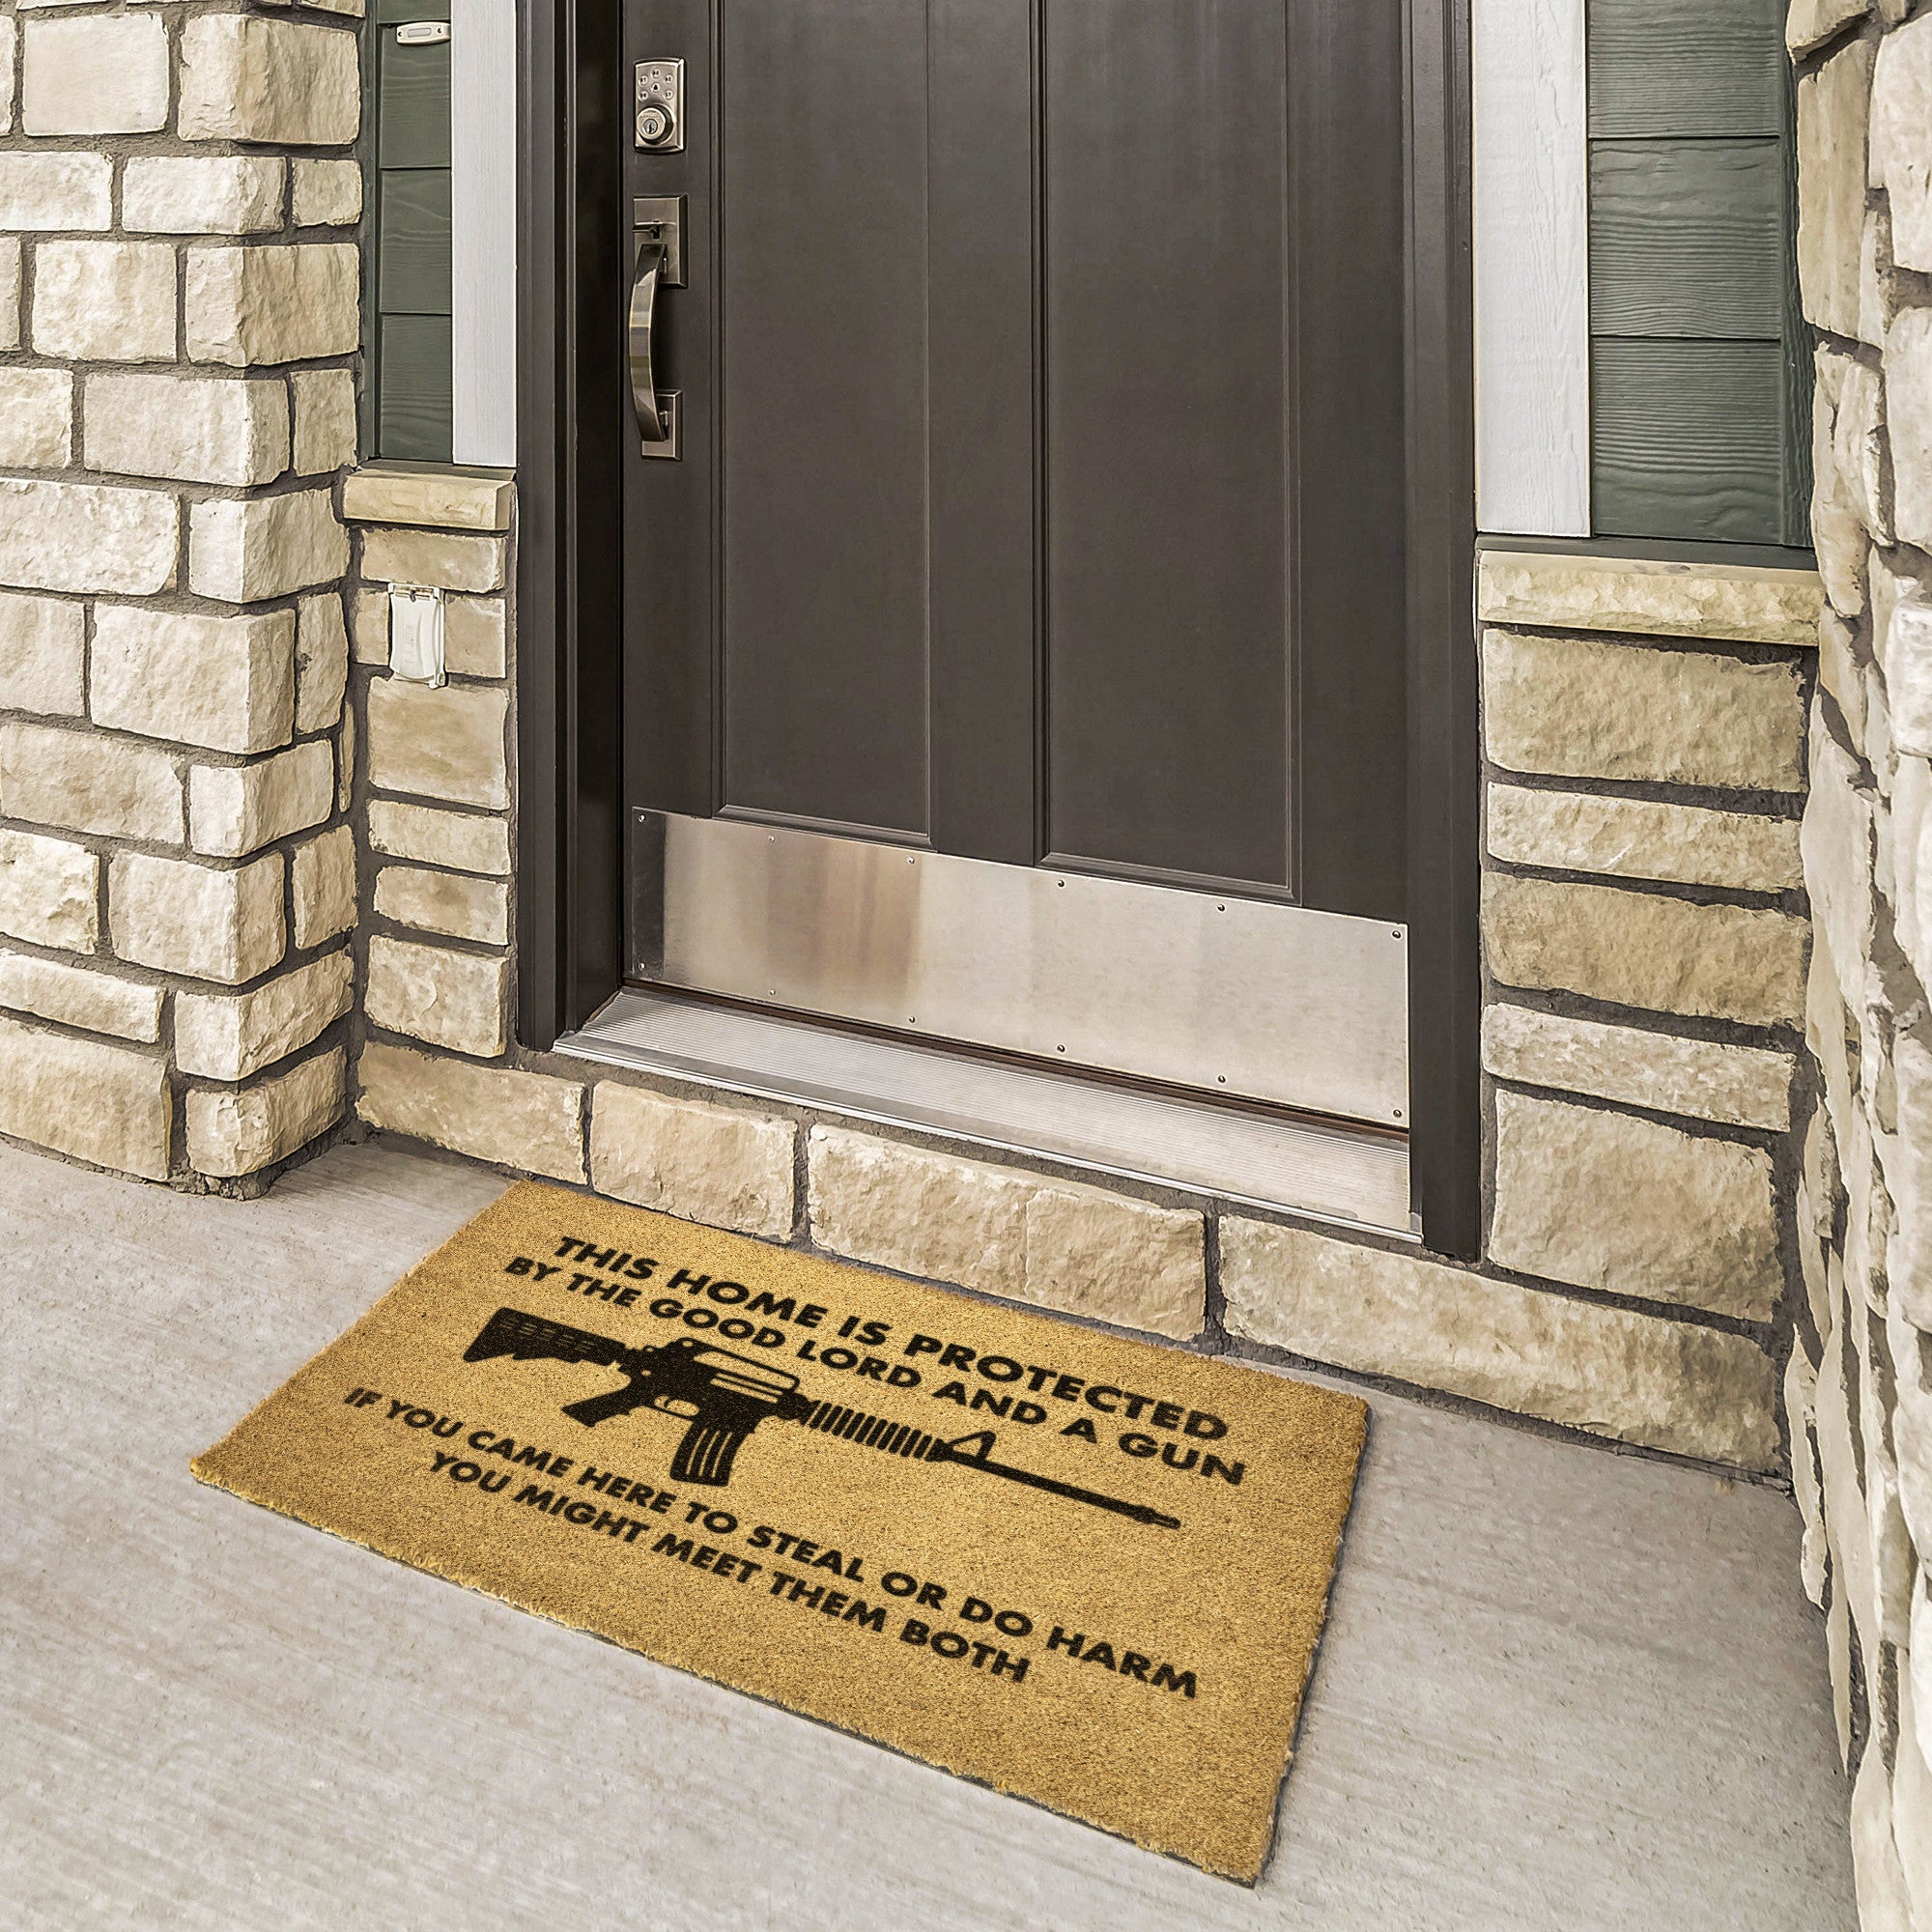 This Home Is Protected By The Good Lord And A Gun If You Came Here To Steal You Might Meet Them Both Doormat -Home Goods | Drunk America 